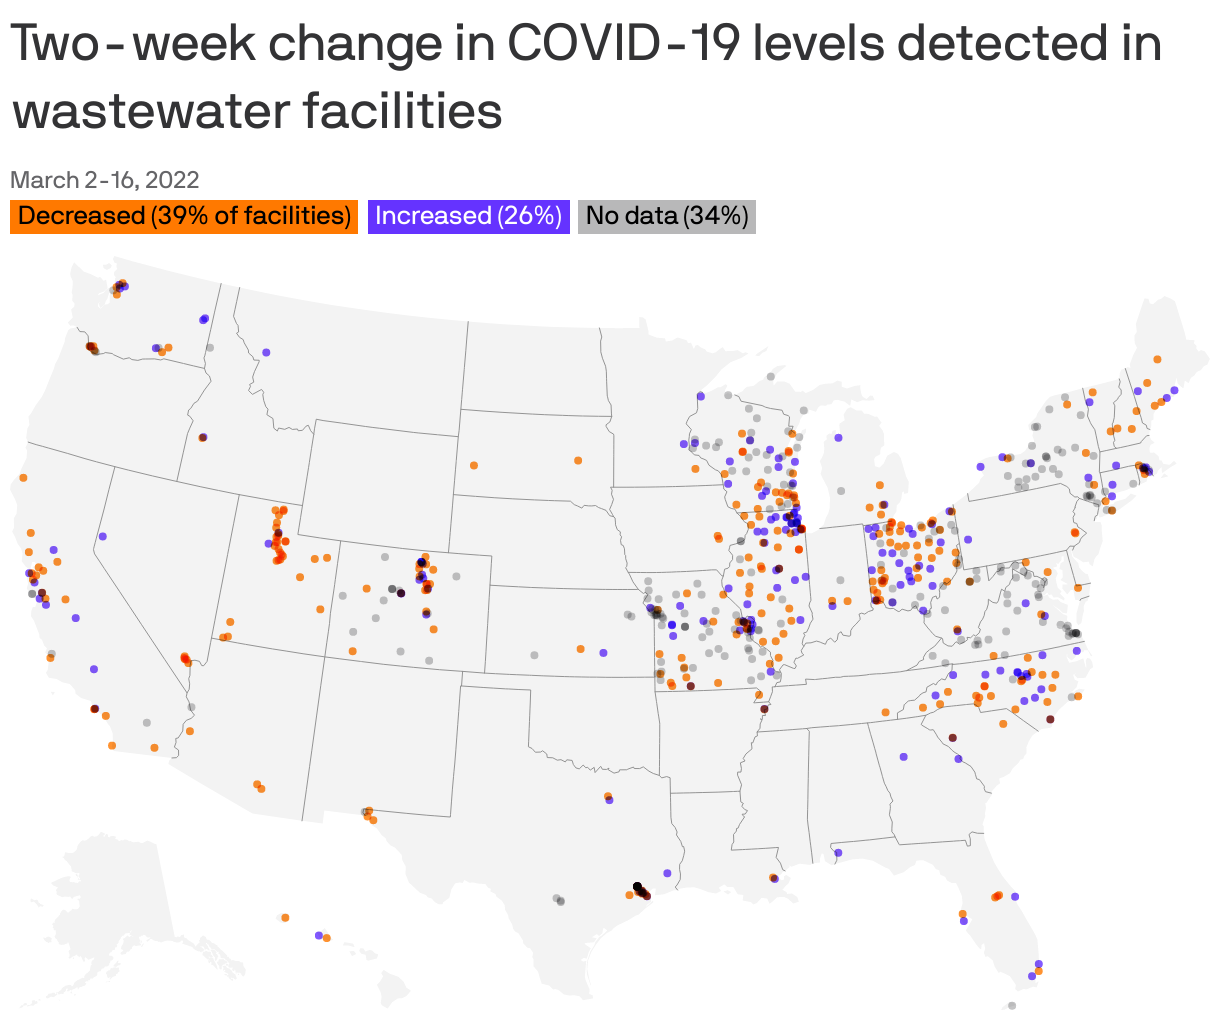 Two-week change in COVID-19 levels detected in wastewater facilities